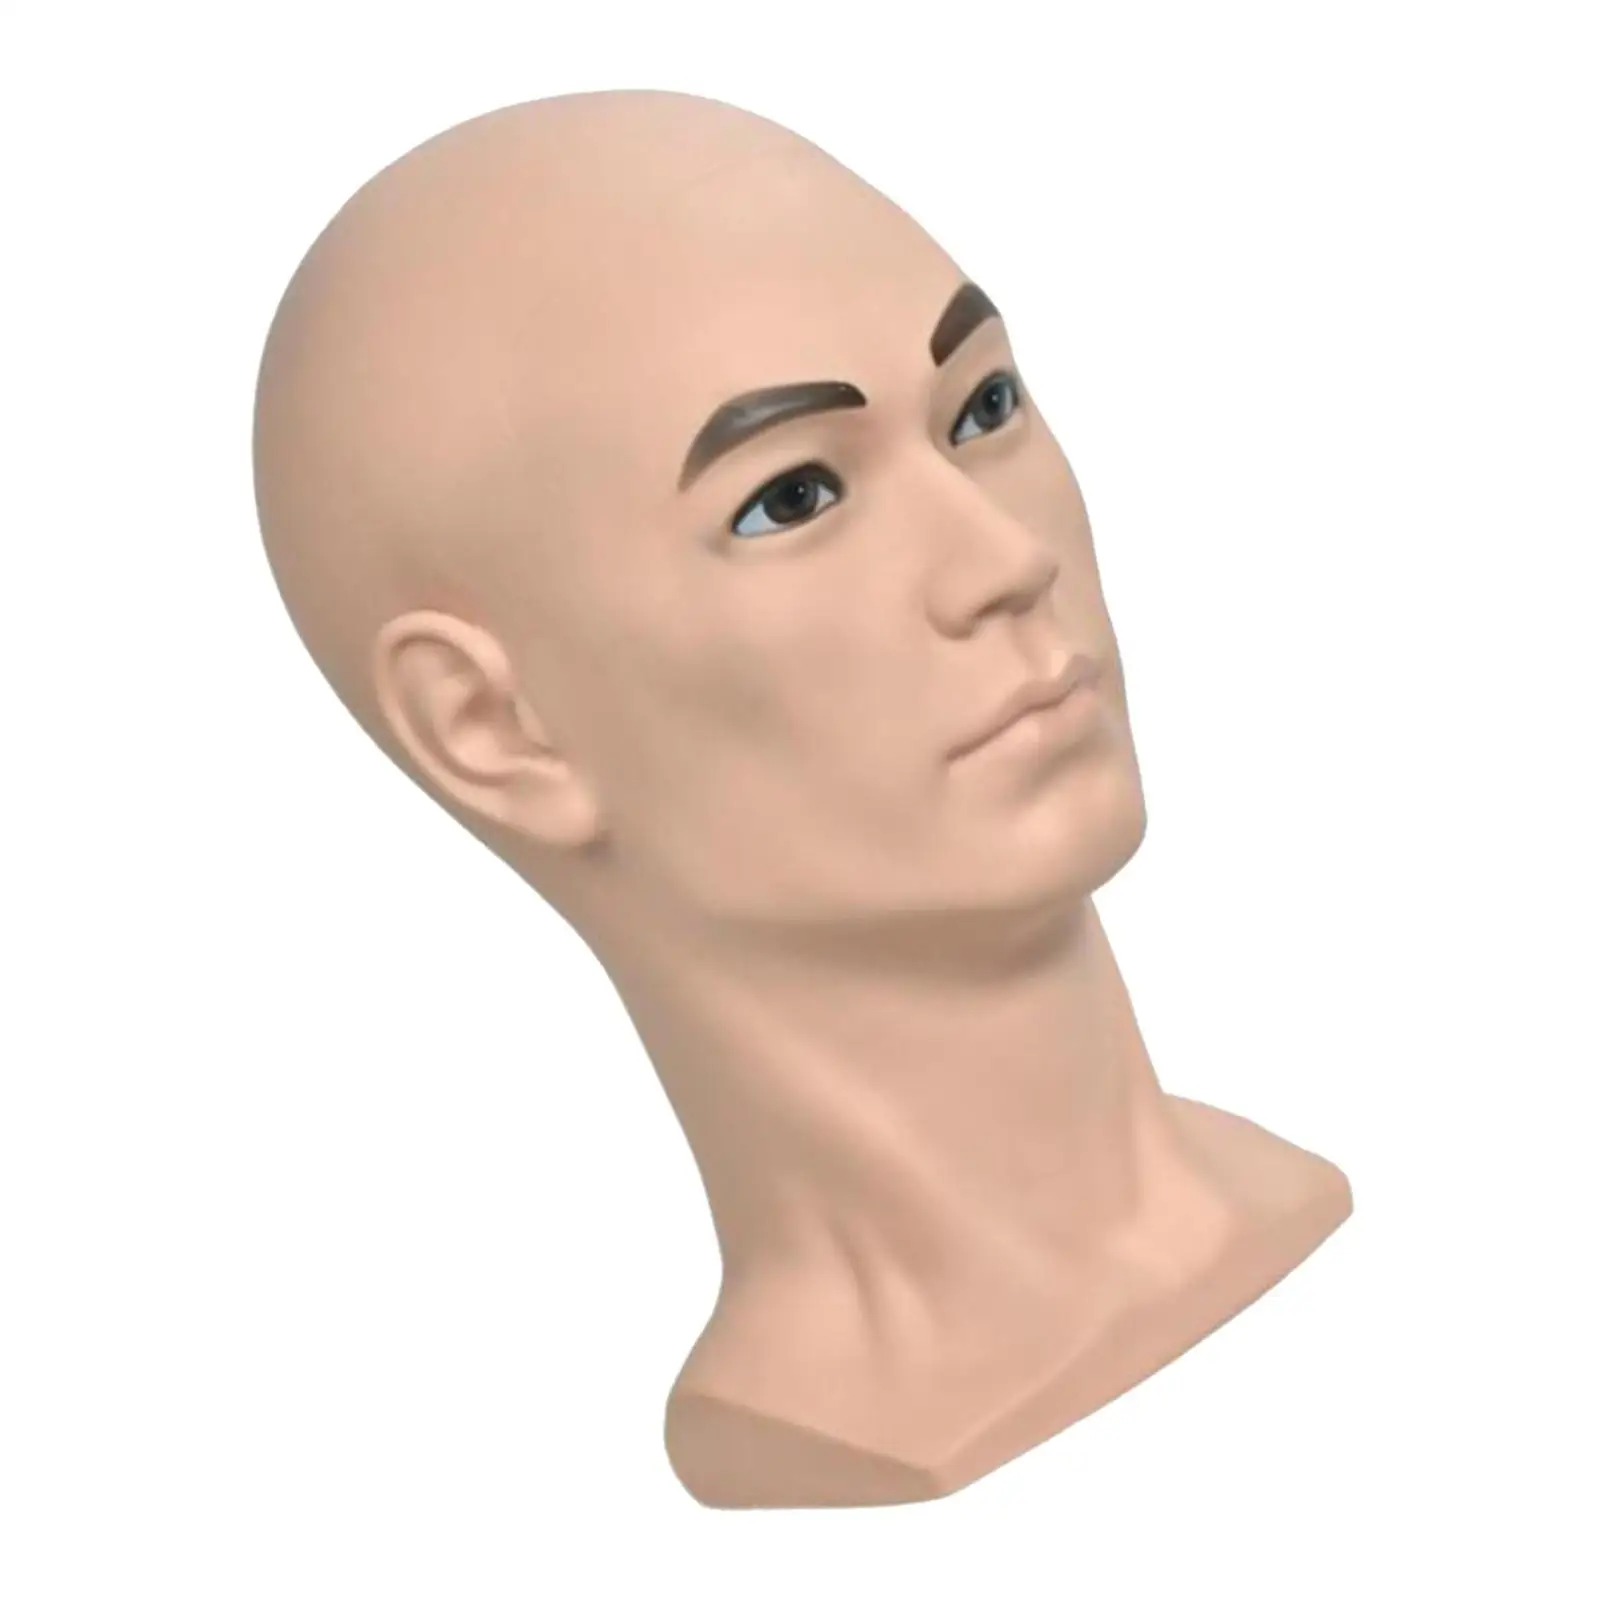 Bald Mannequin Head Model Head For Cosmetology, Making Wigs, Hats, Scarves,  Glasses Display, Wholesale From Manufacturer